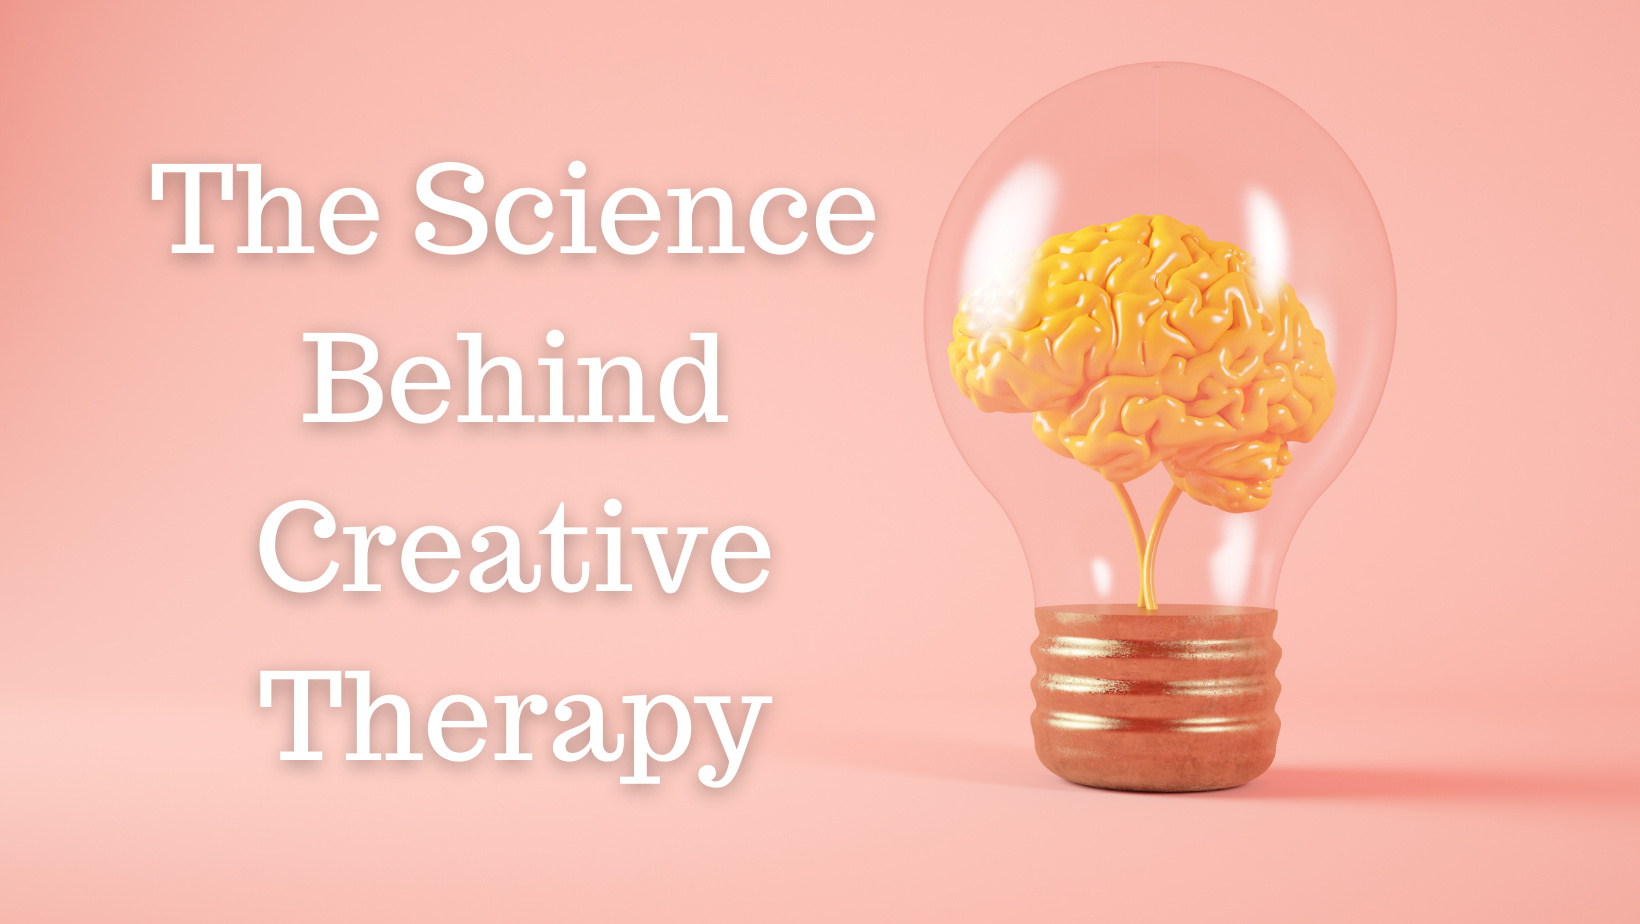 The Science Behind Creative Therapy - Oakwood Creative Care